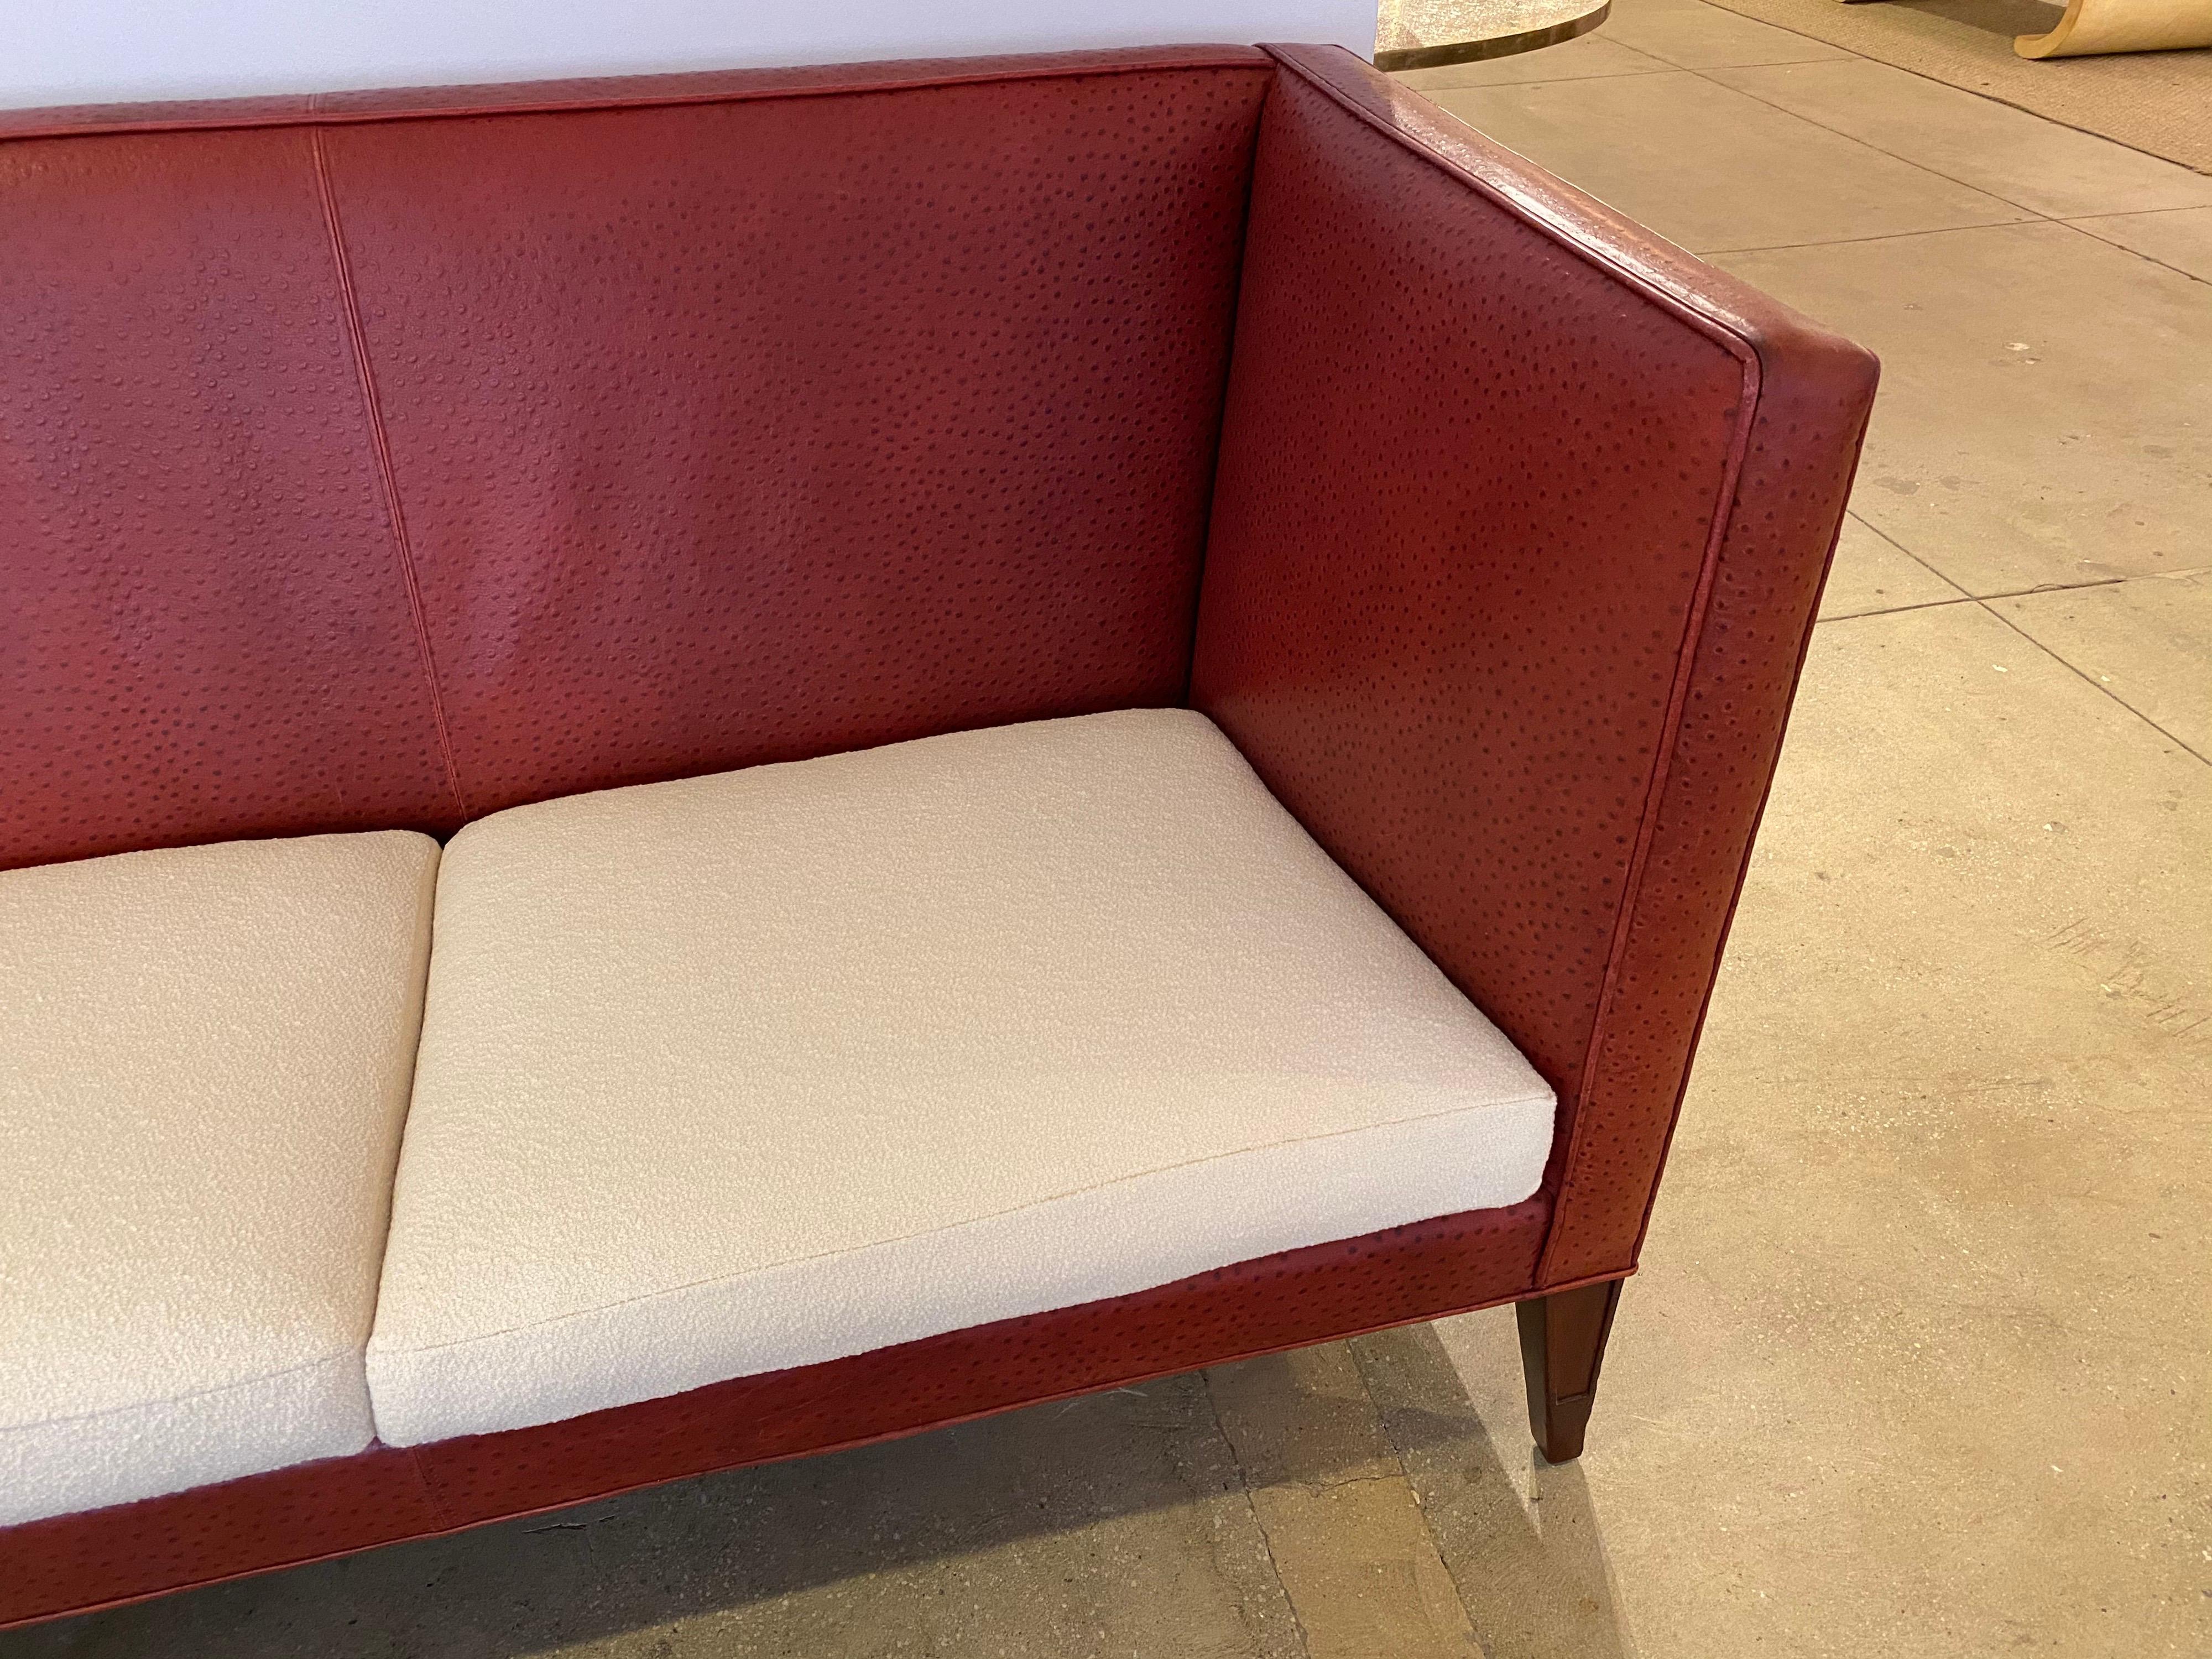 Philippe Starck Redwood Room Clift Hotel Leather Sofa 4